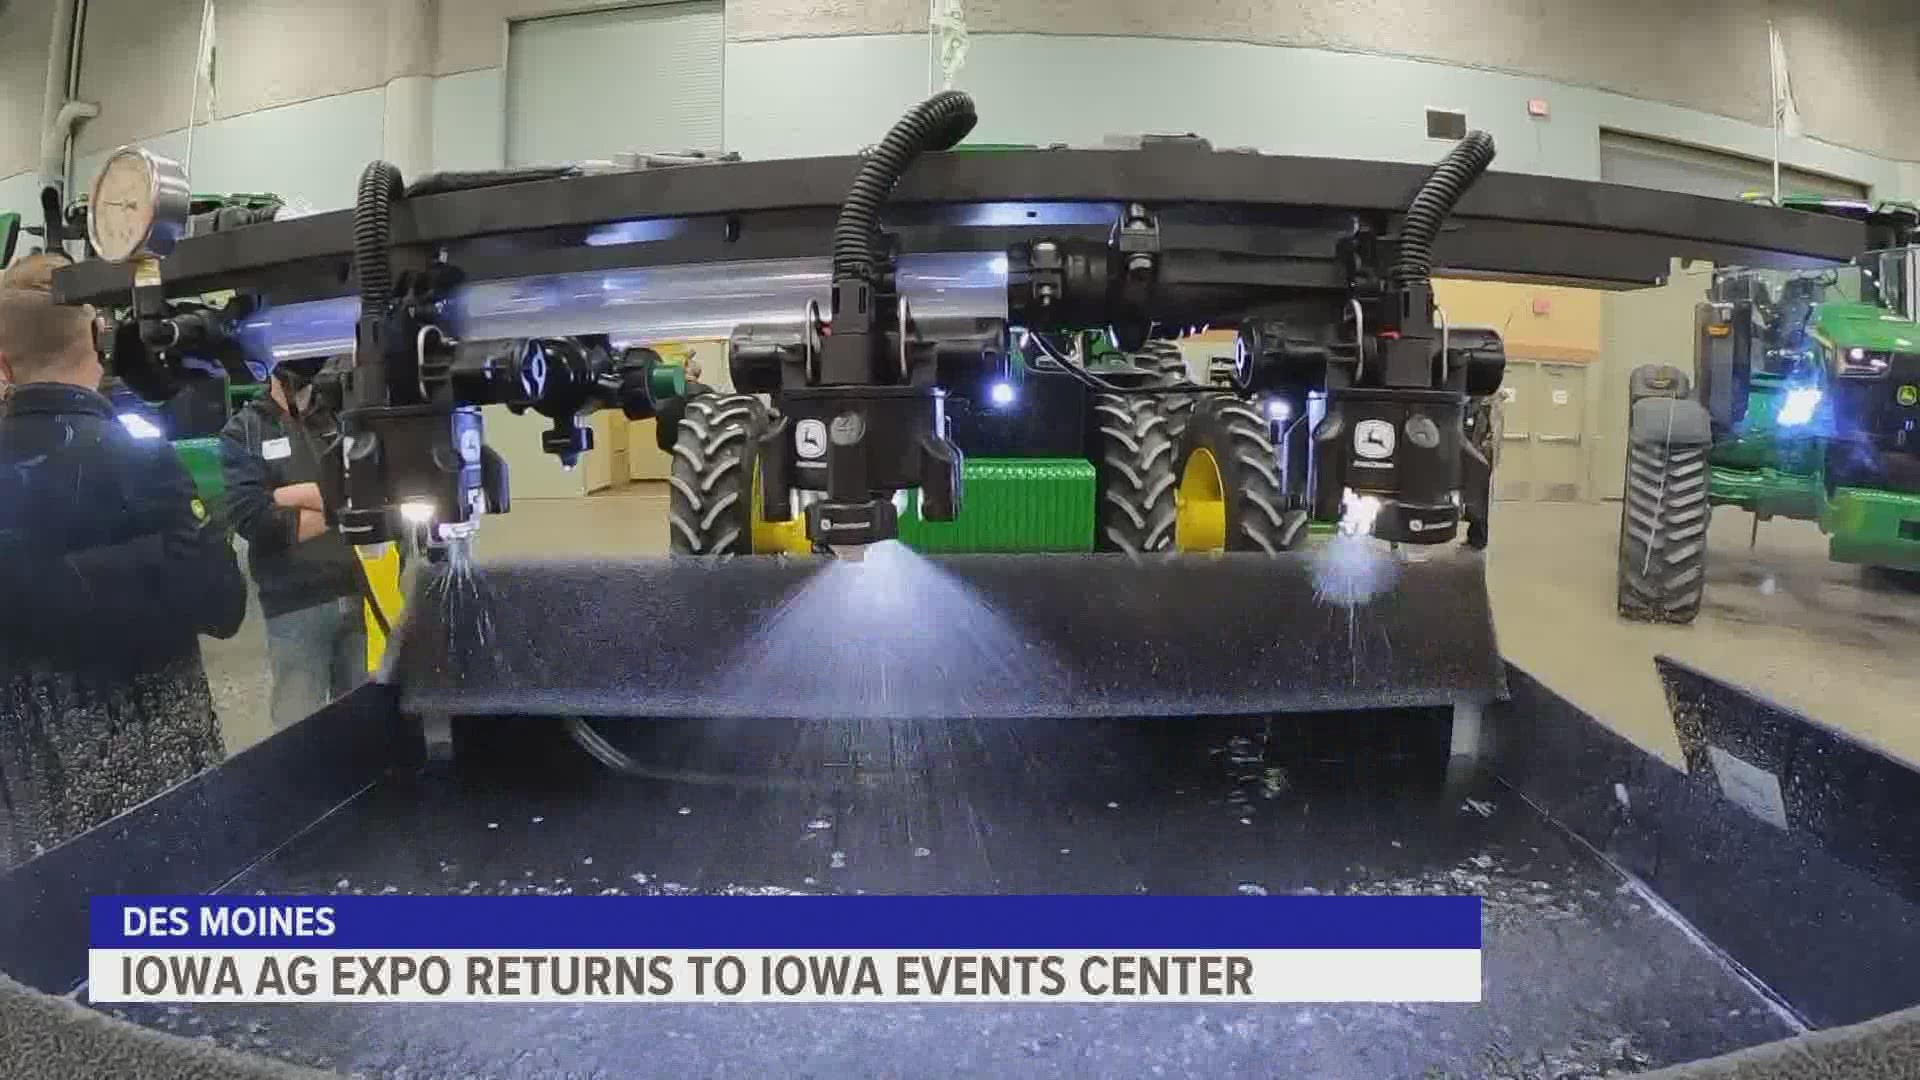 The third-largest indoor agriculture show in the United States adapts to move forward in the pandemic.